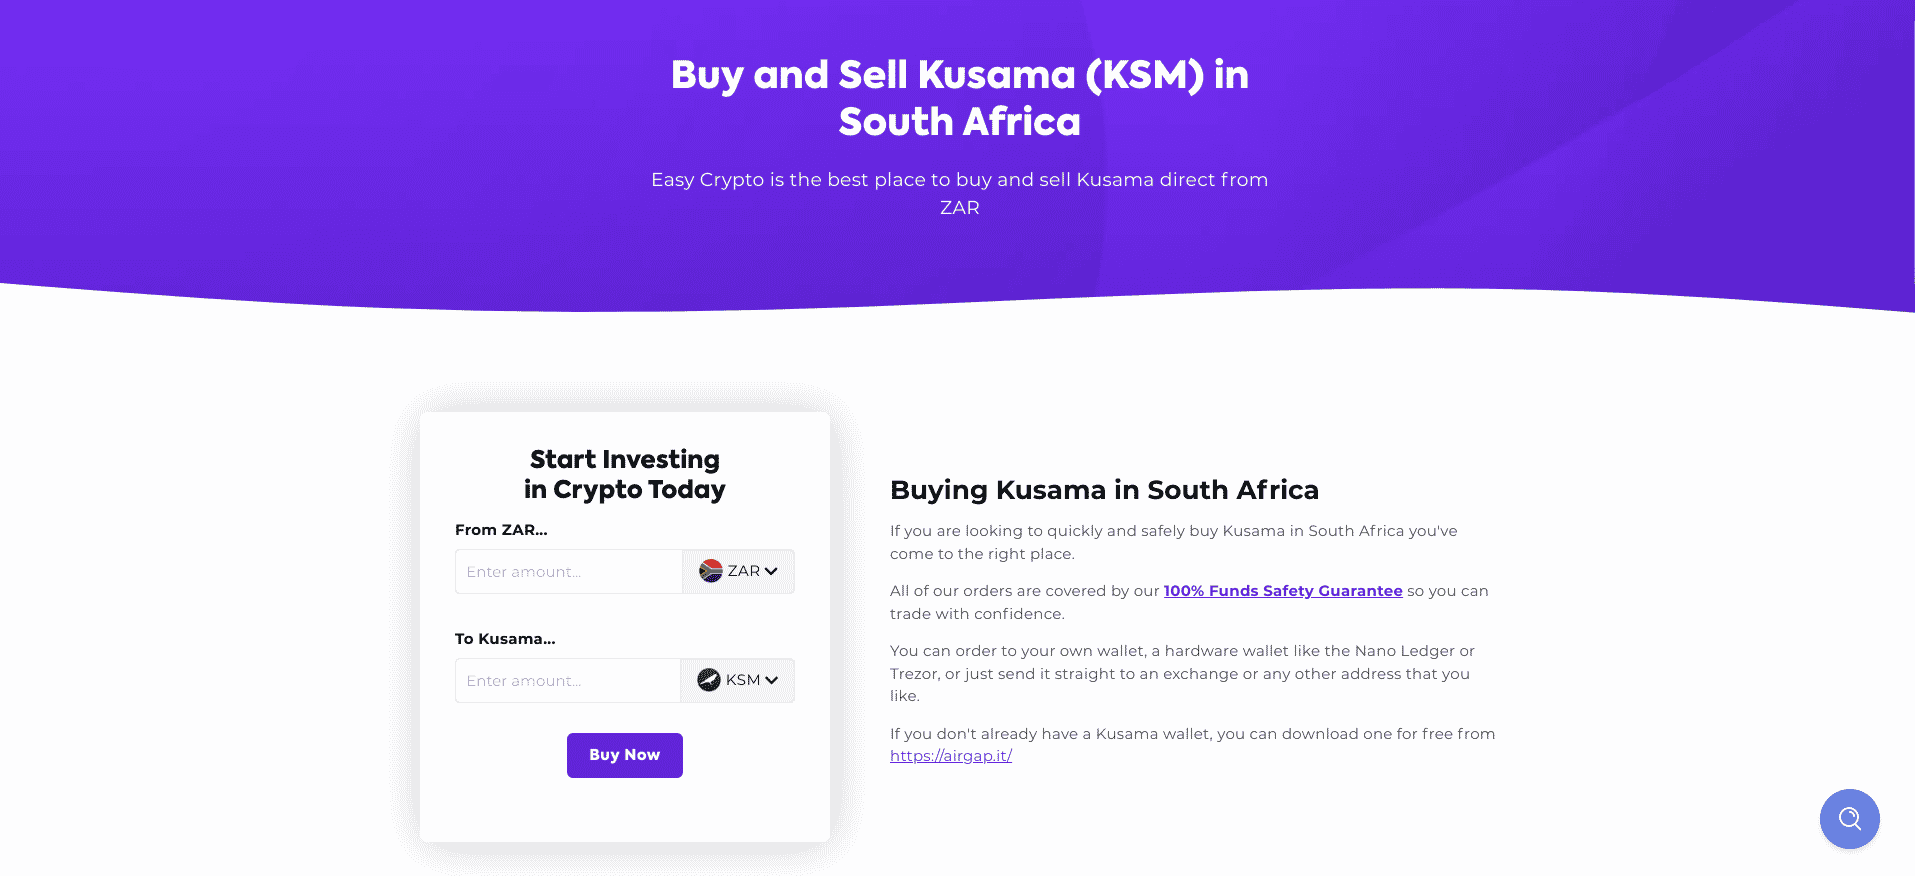 Buy and sell Kusama in South Africa